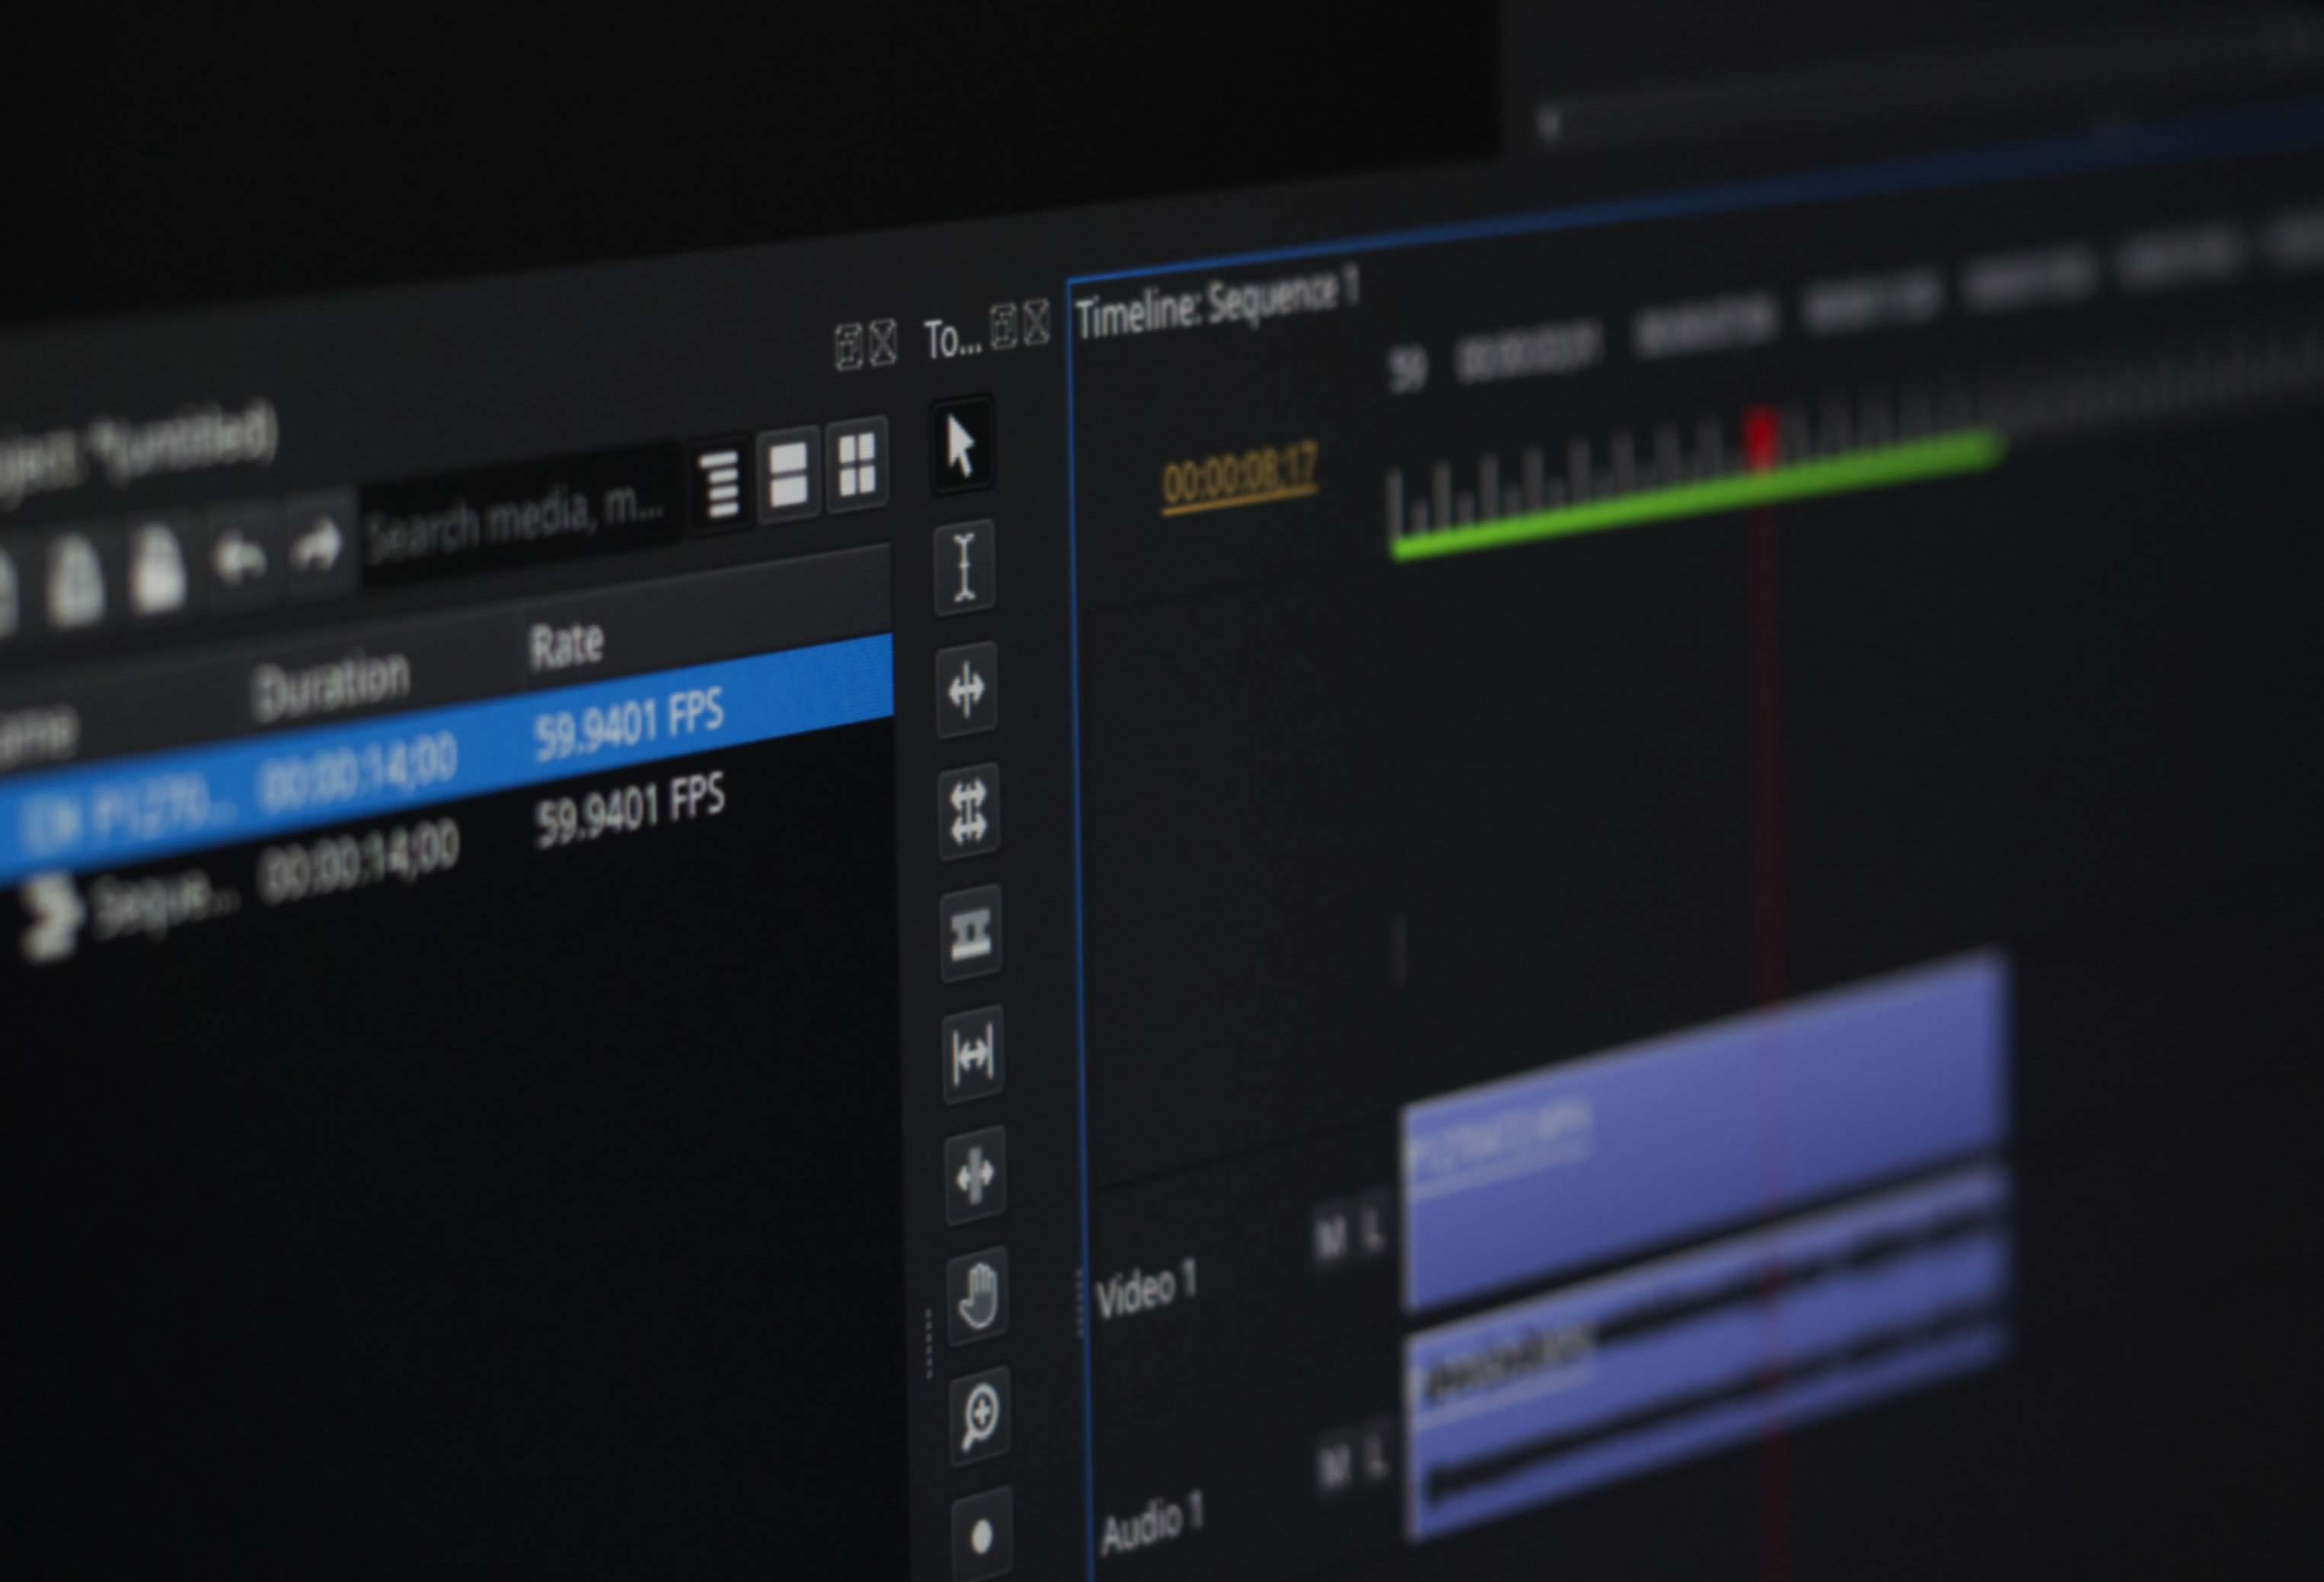 Open source video editor Olive 0.2 said to be nearing completion